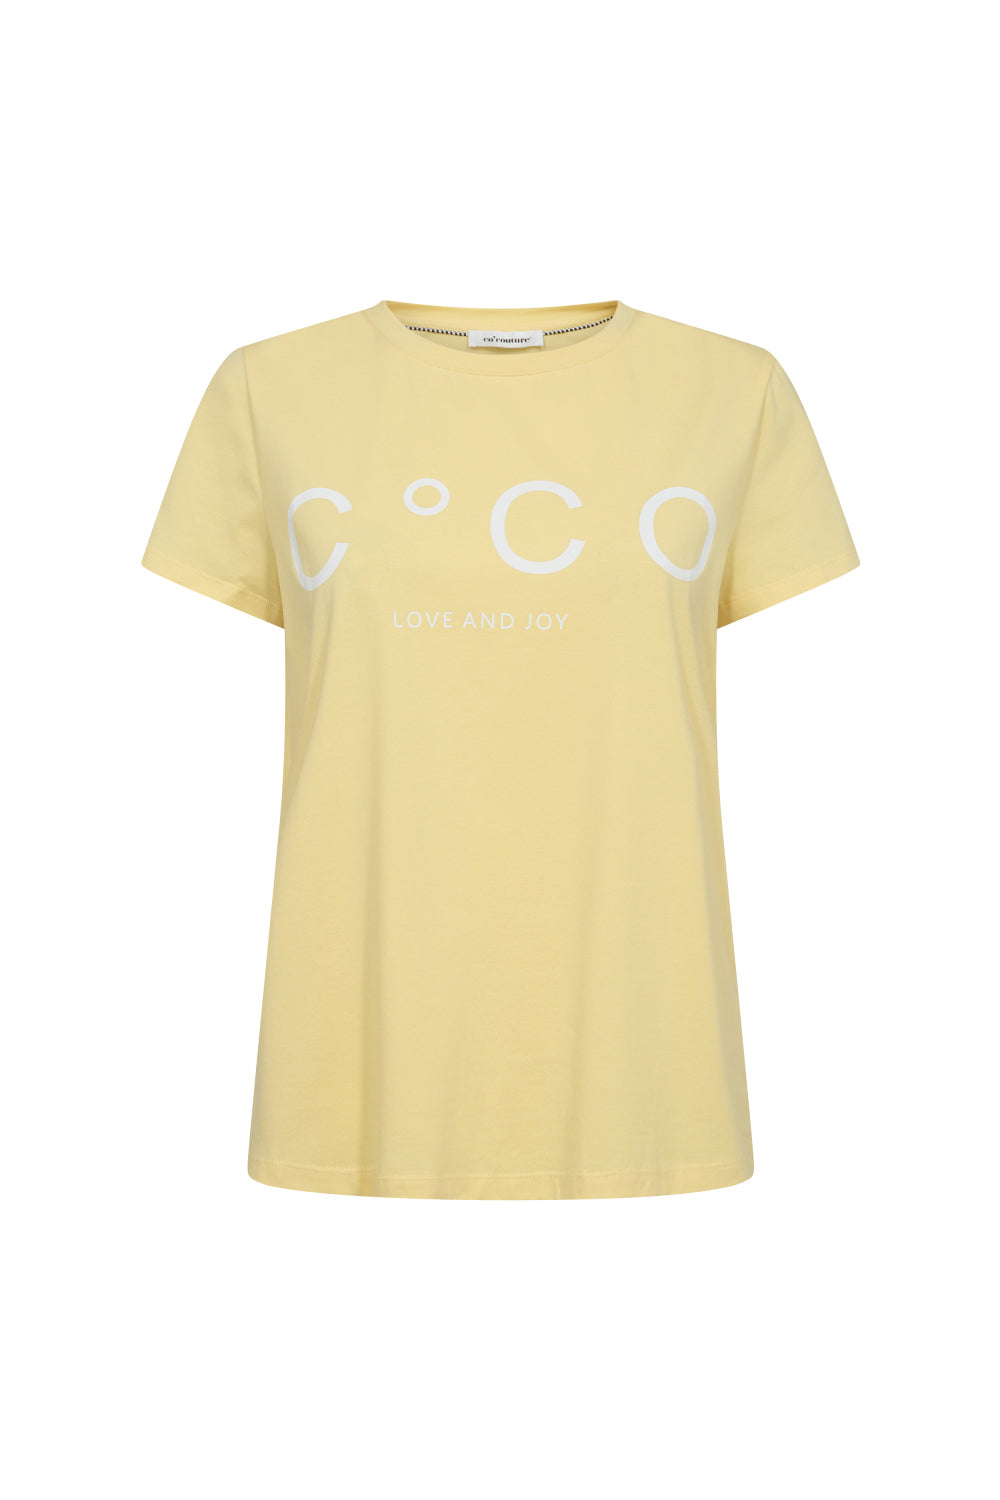 Coco Signature Tee - Pale Yellow